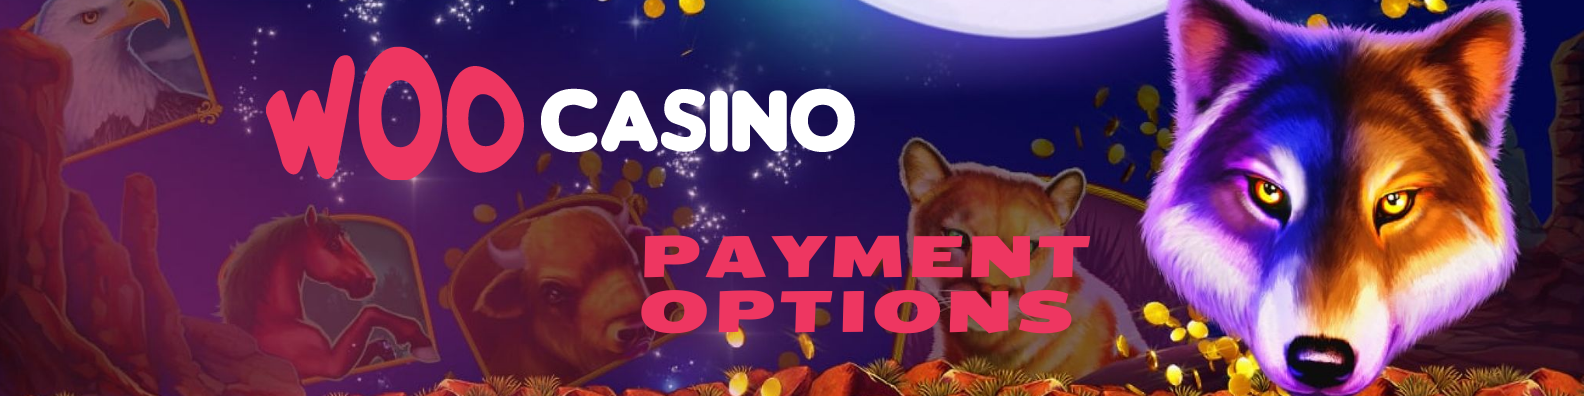 Woo Casino Payment Options